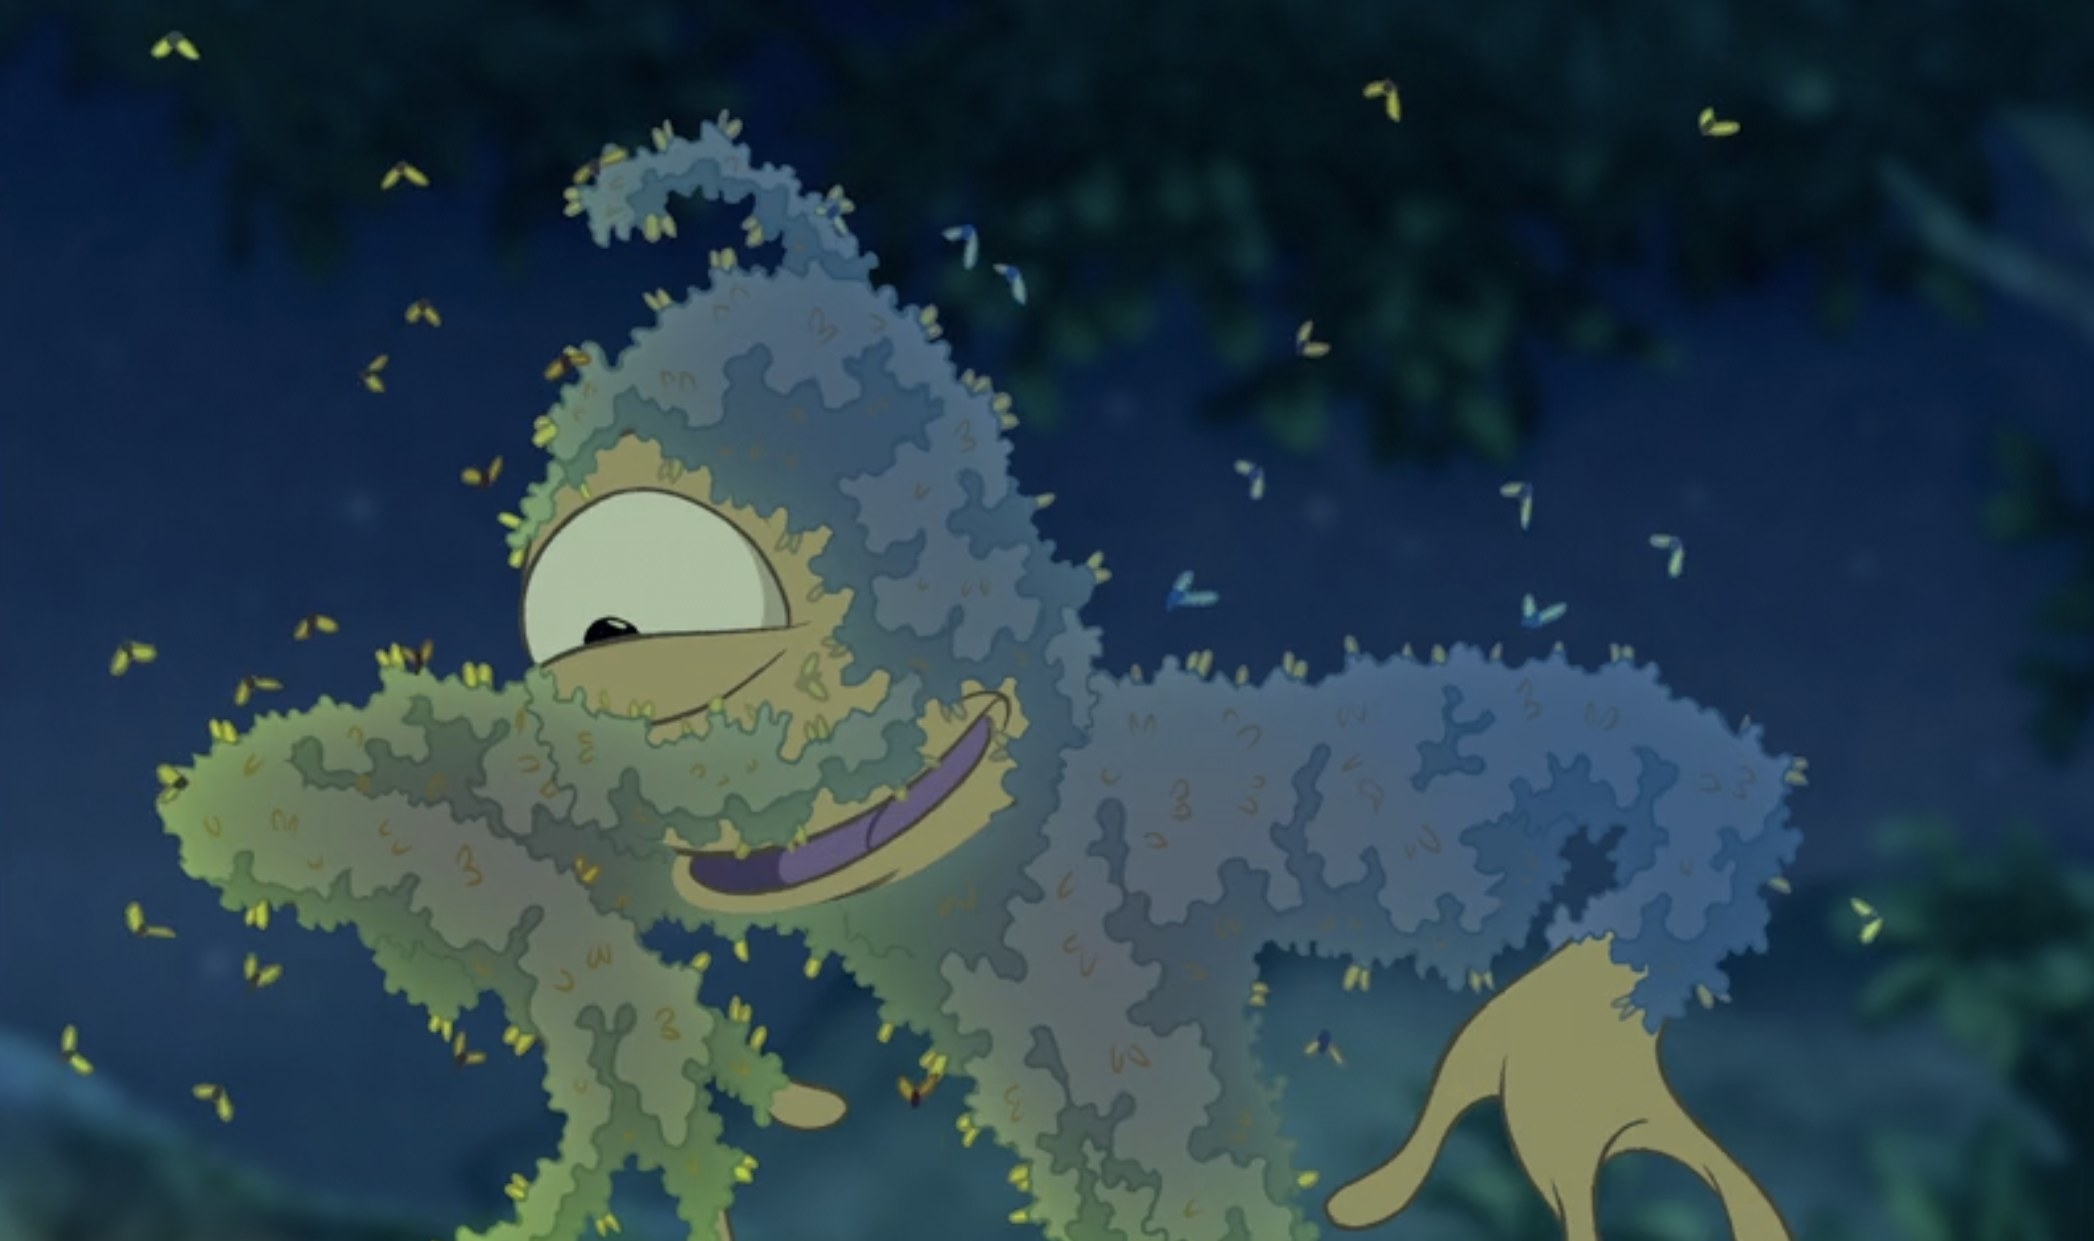 Pleakley covered in mosquitos